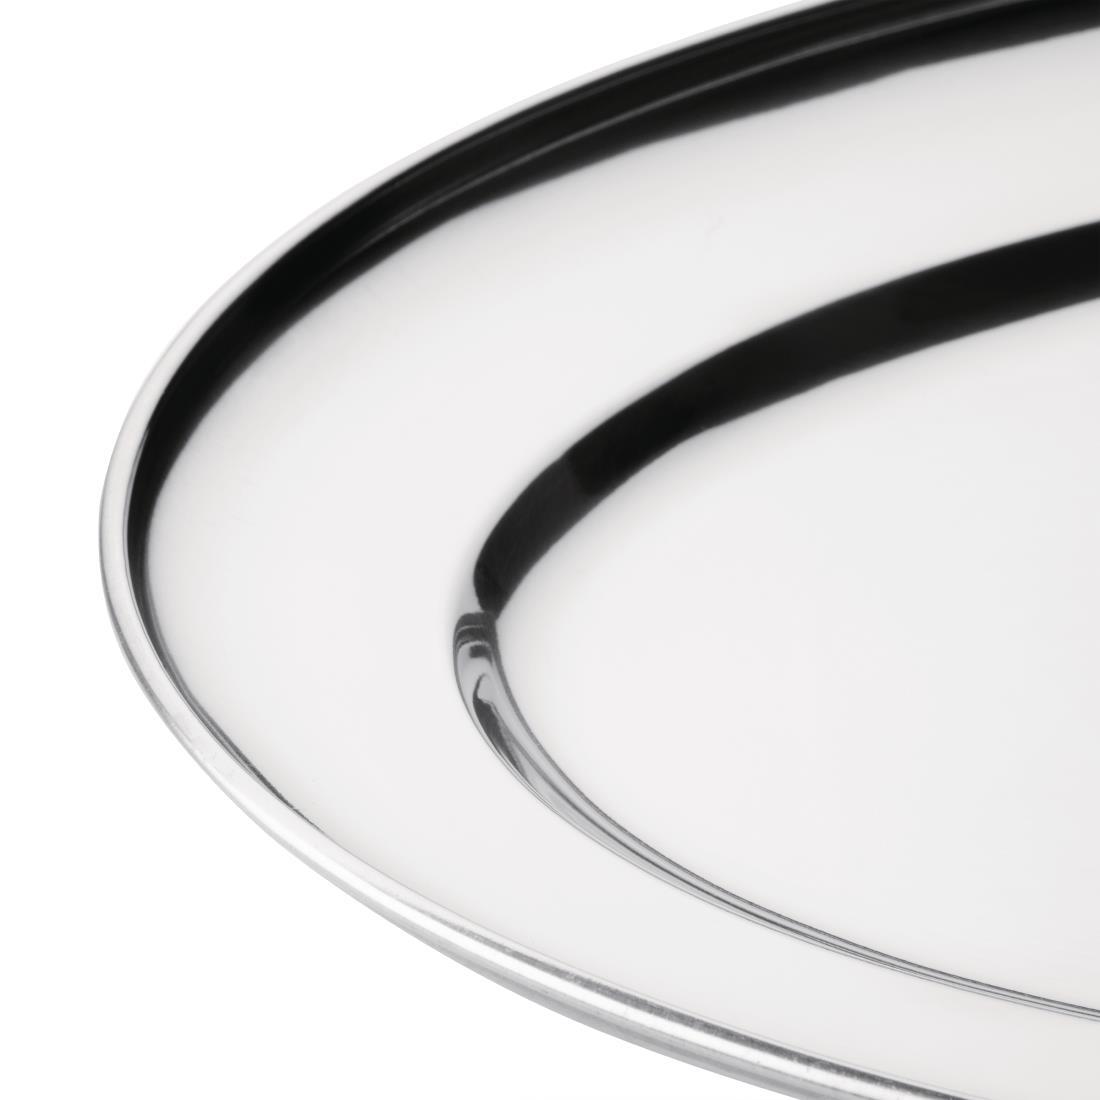 Olympia Stainless Steel Oval Serving Tray 605mm - K369  - 6